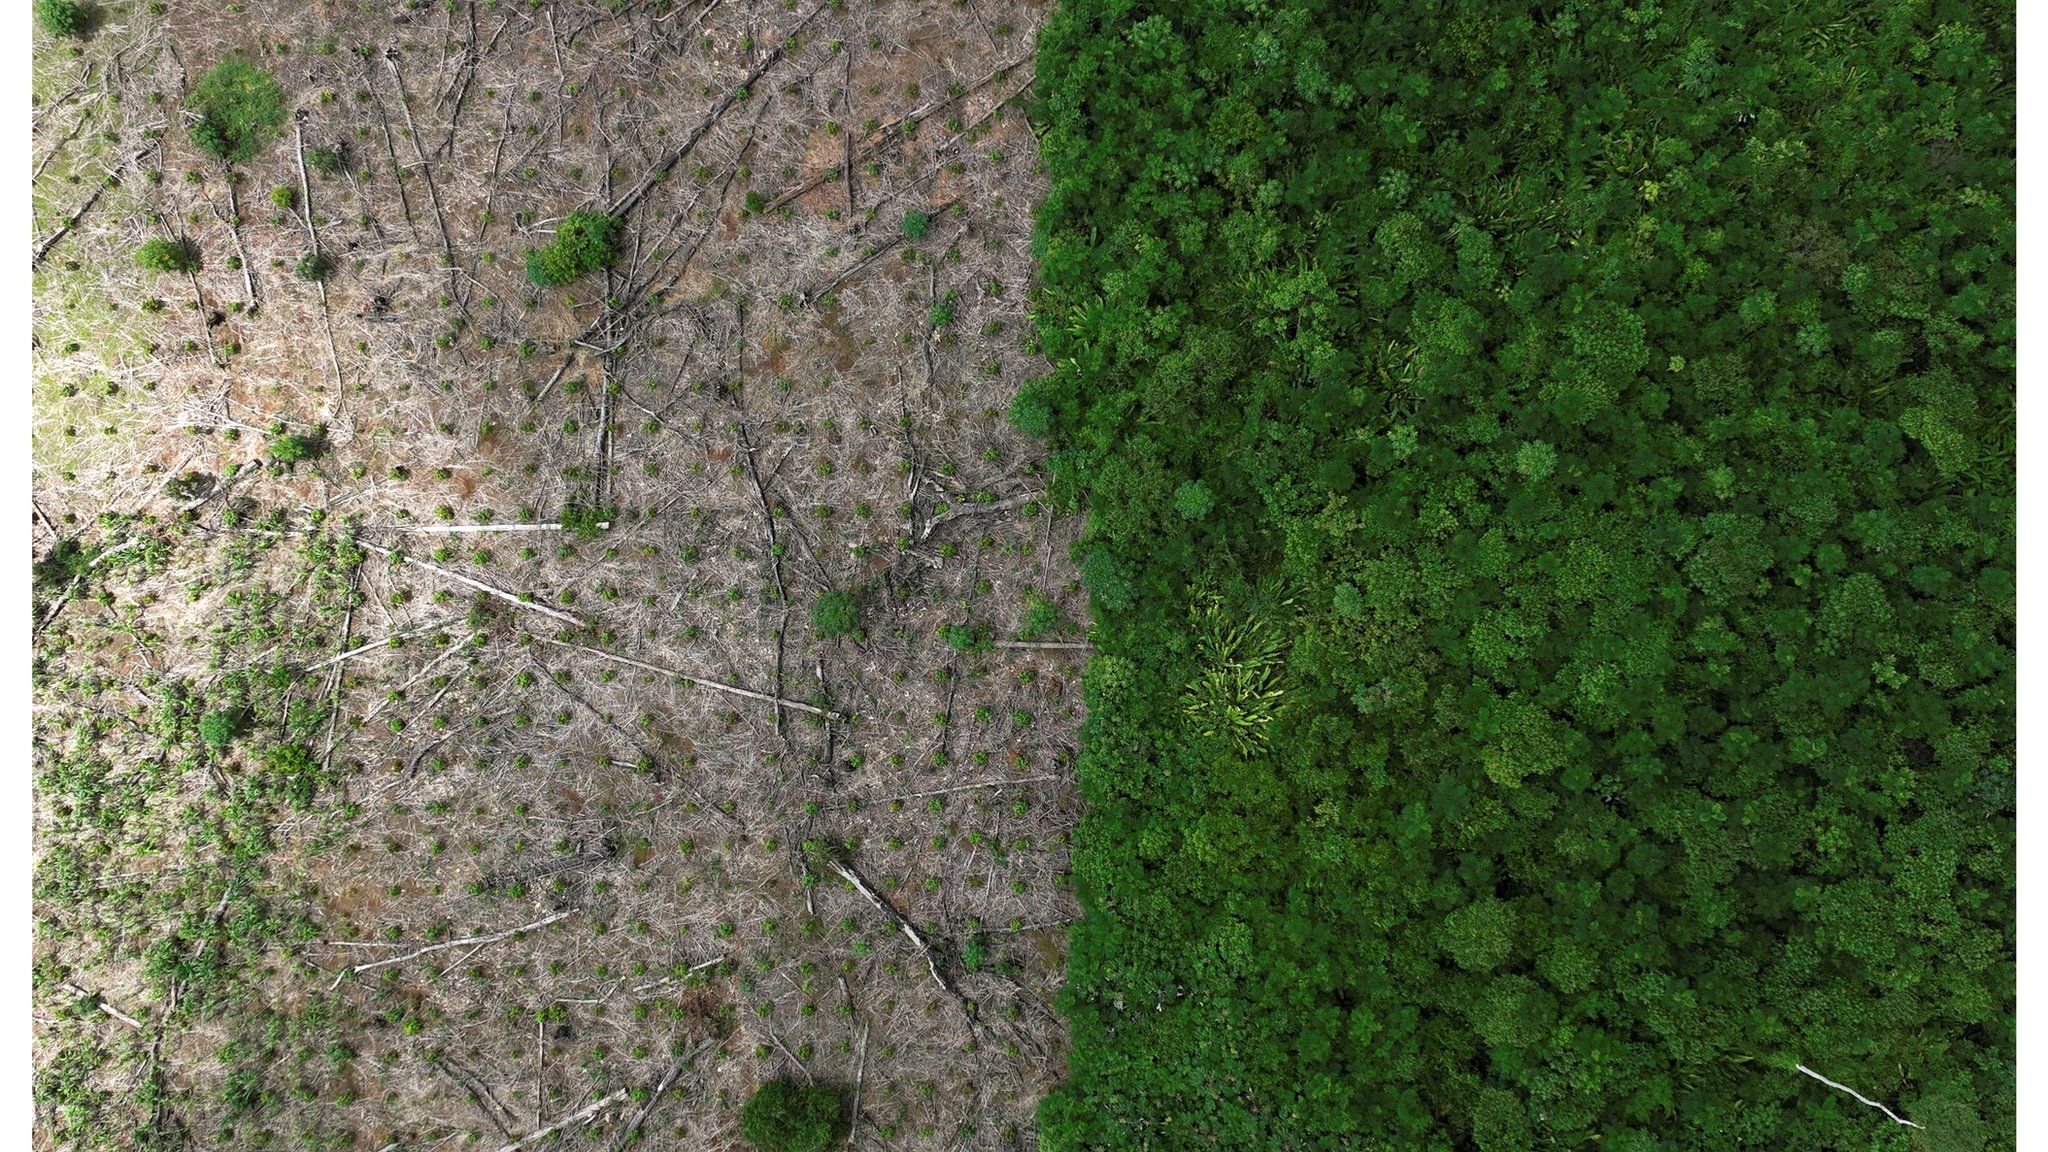 Picture of deforestation in the Amazon